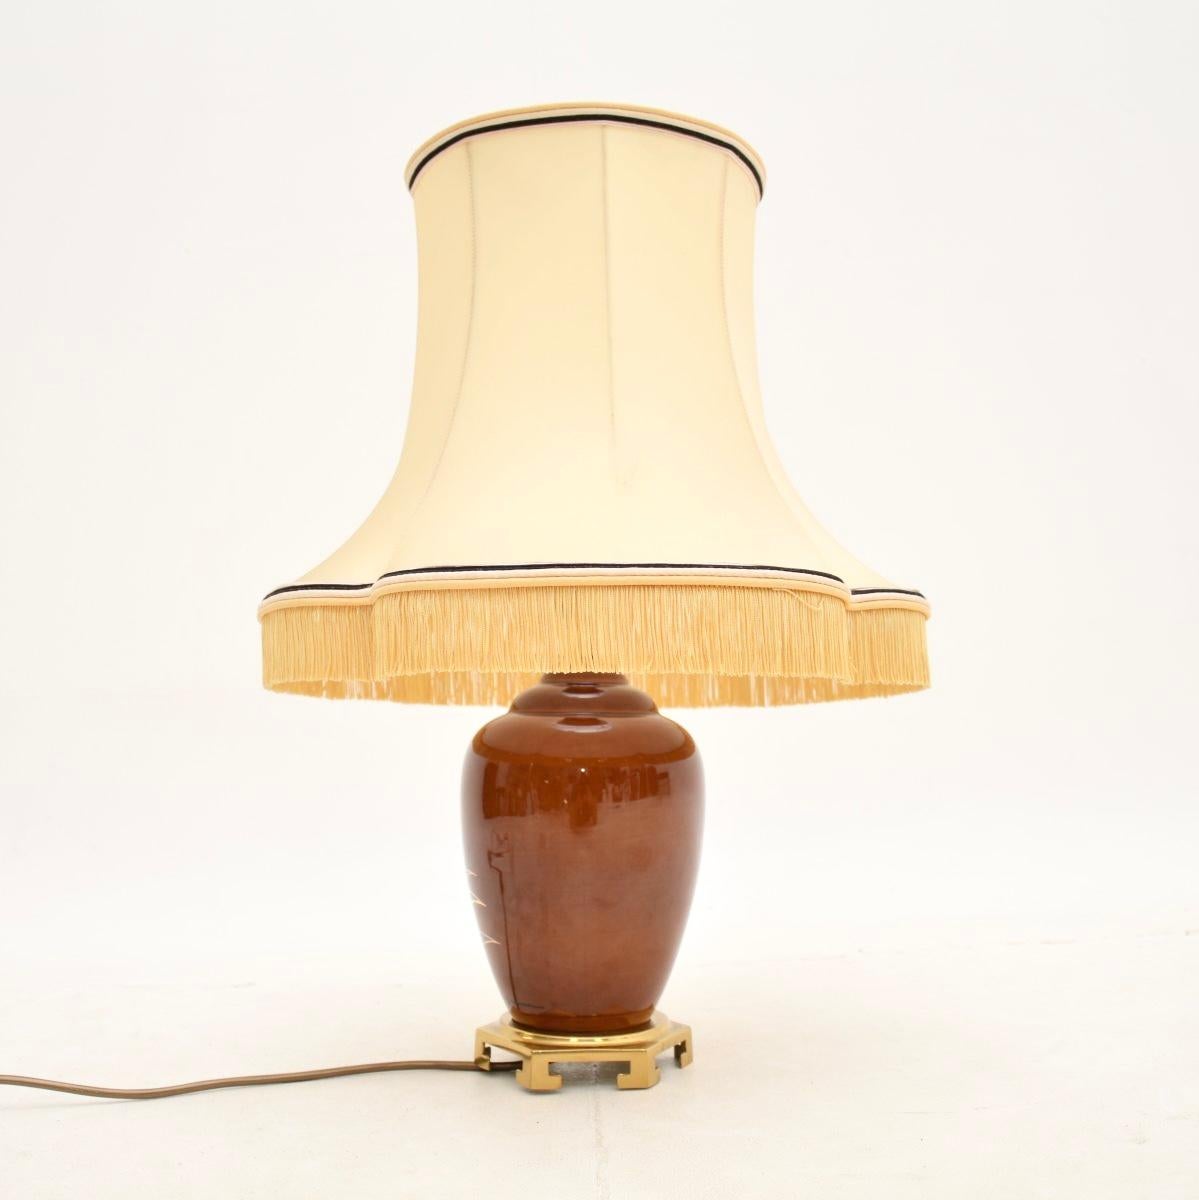 An absolutely stunning vintage French ceramic table lamp, dating from the 1970’s.

This is of superb quality, it is a lovely size and has gorgeous decorations. It is hand painted and signed by the artist, the lamp sits on a stunning brass oriental